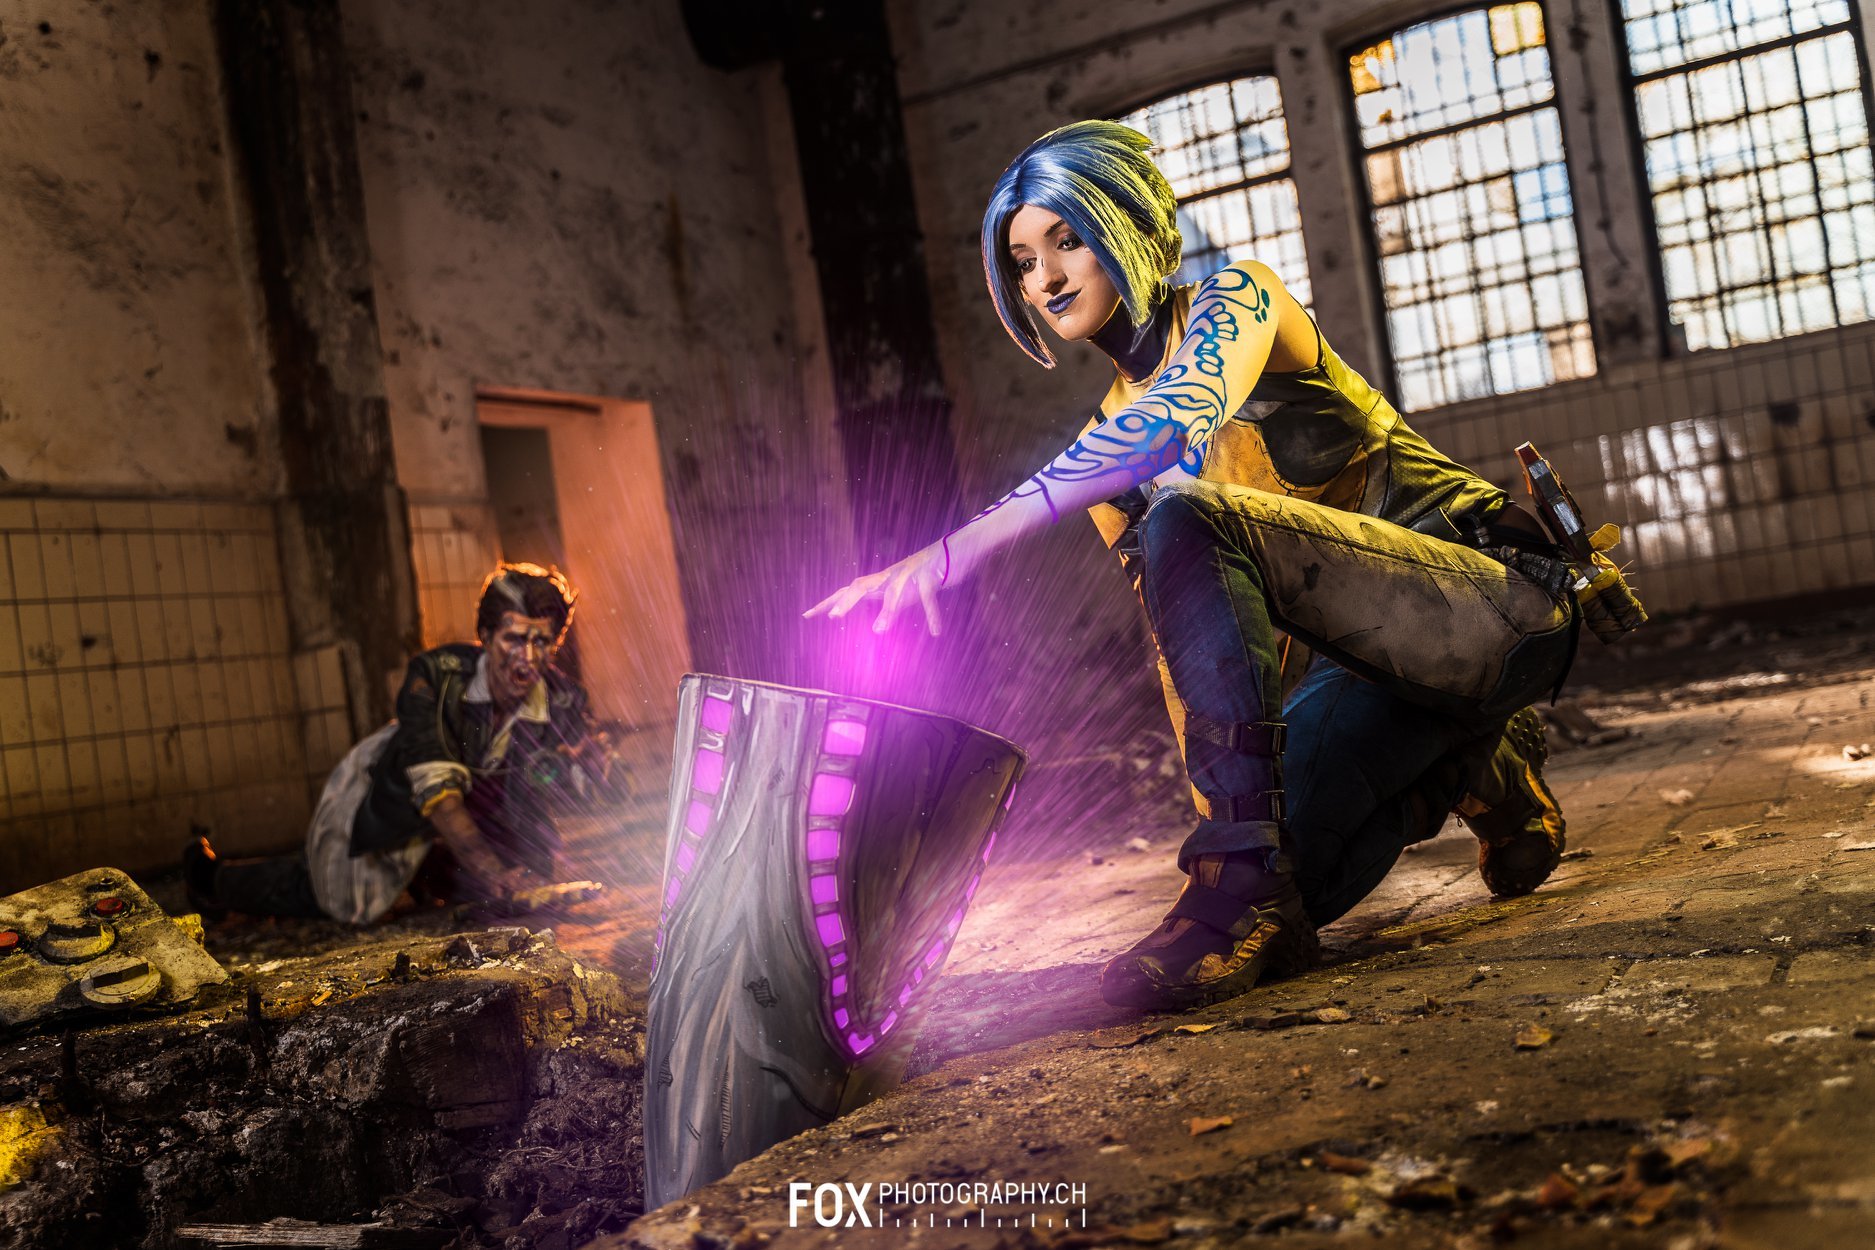 Borderlands 2 - The Fall of Handsome Jack by Mary & Feinobi cosplay - Cosplay, Borderlands, Borderlands 2, Handsome Jack, Games, Mayan, Longpost